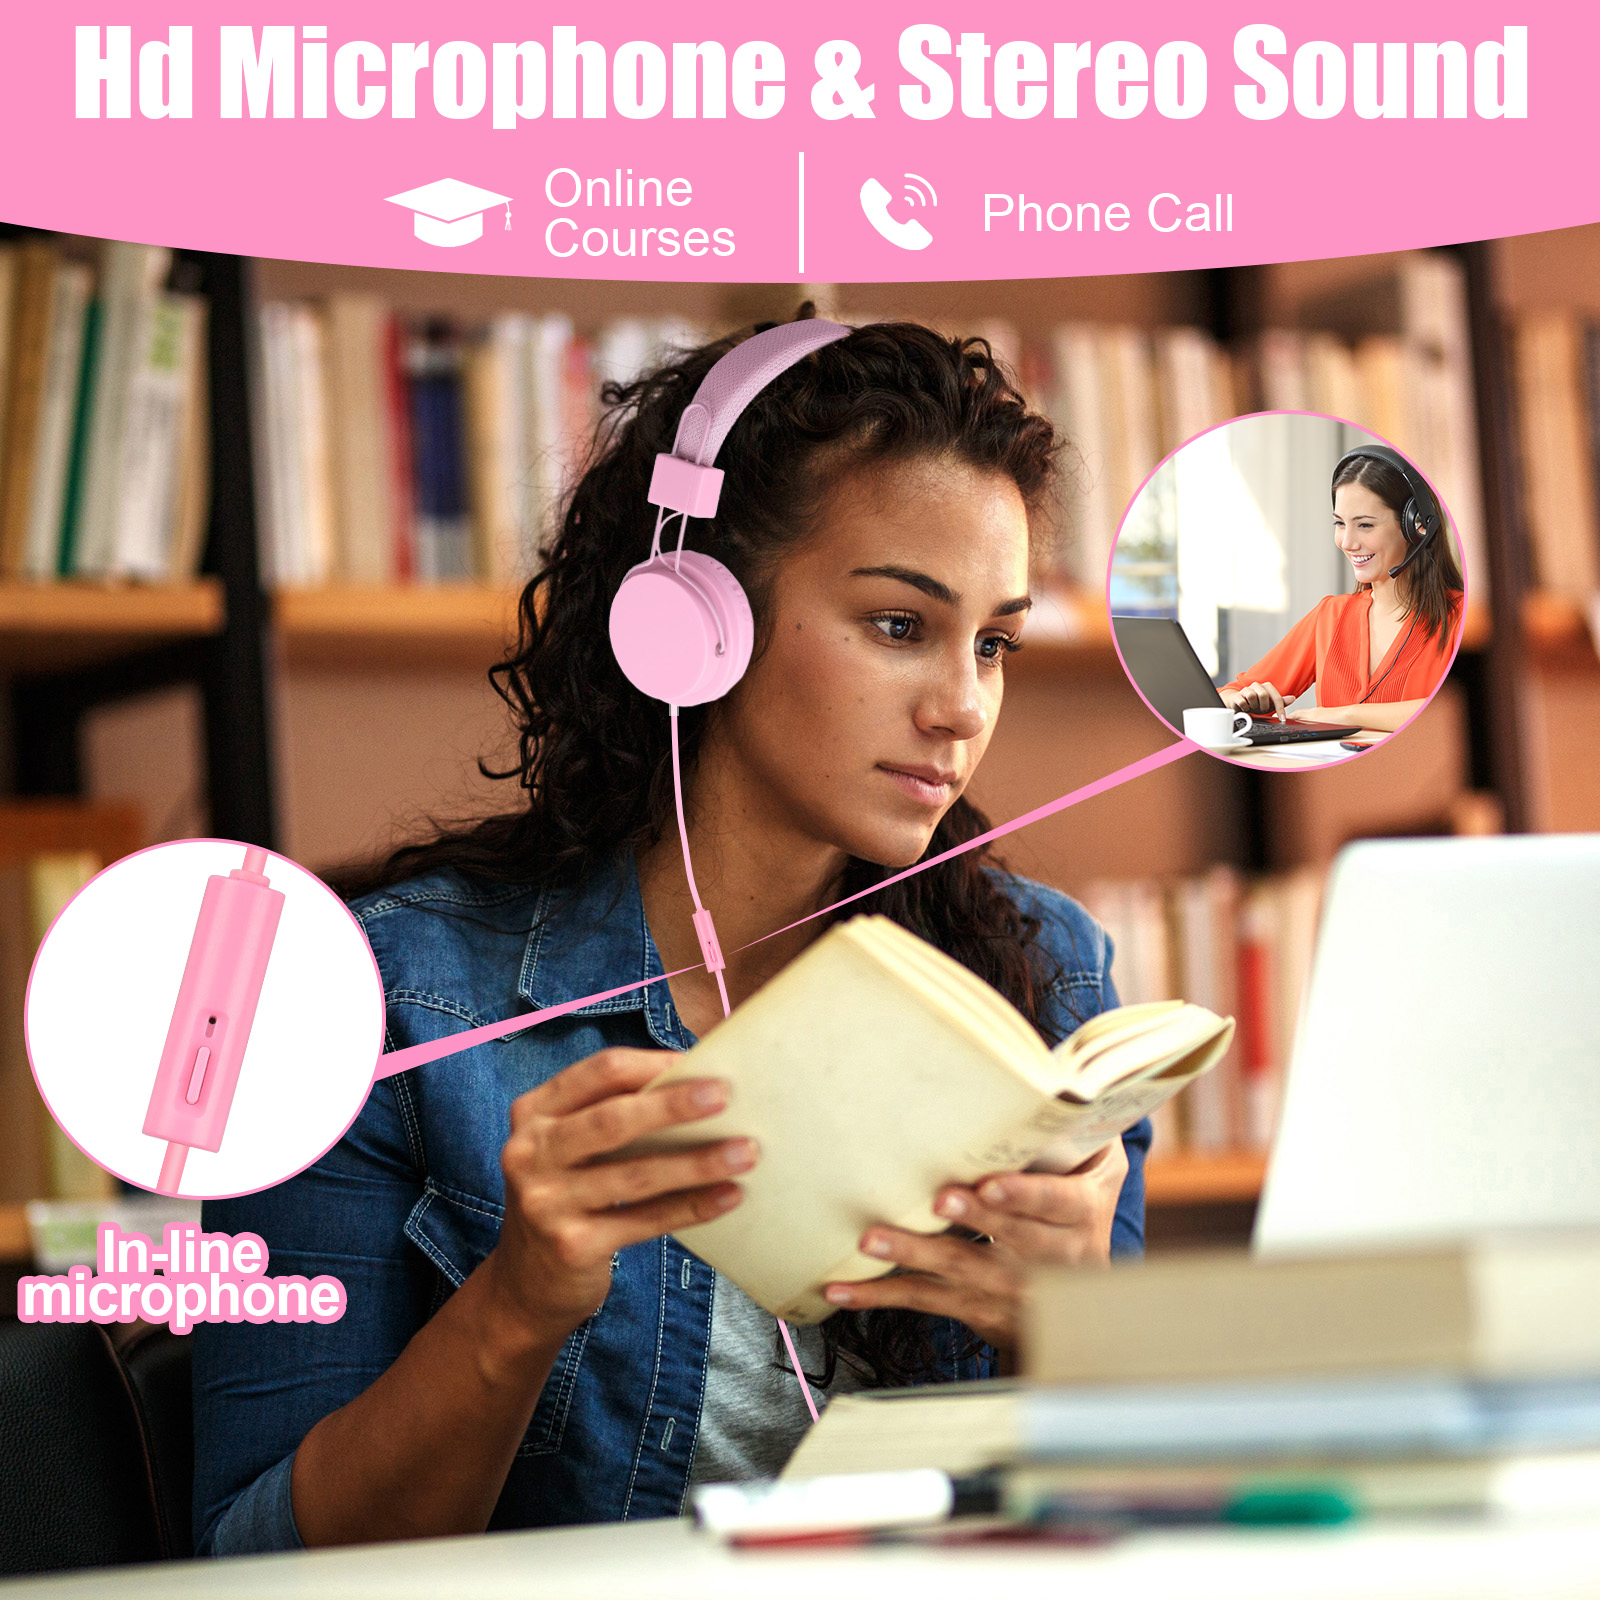 Foldable Noise Reduction Headphones for Android